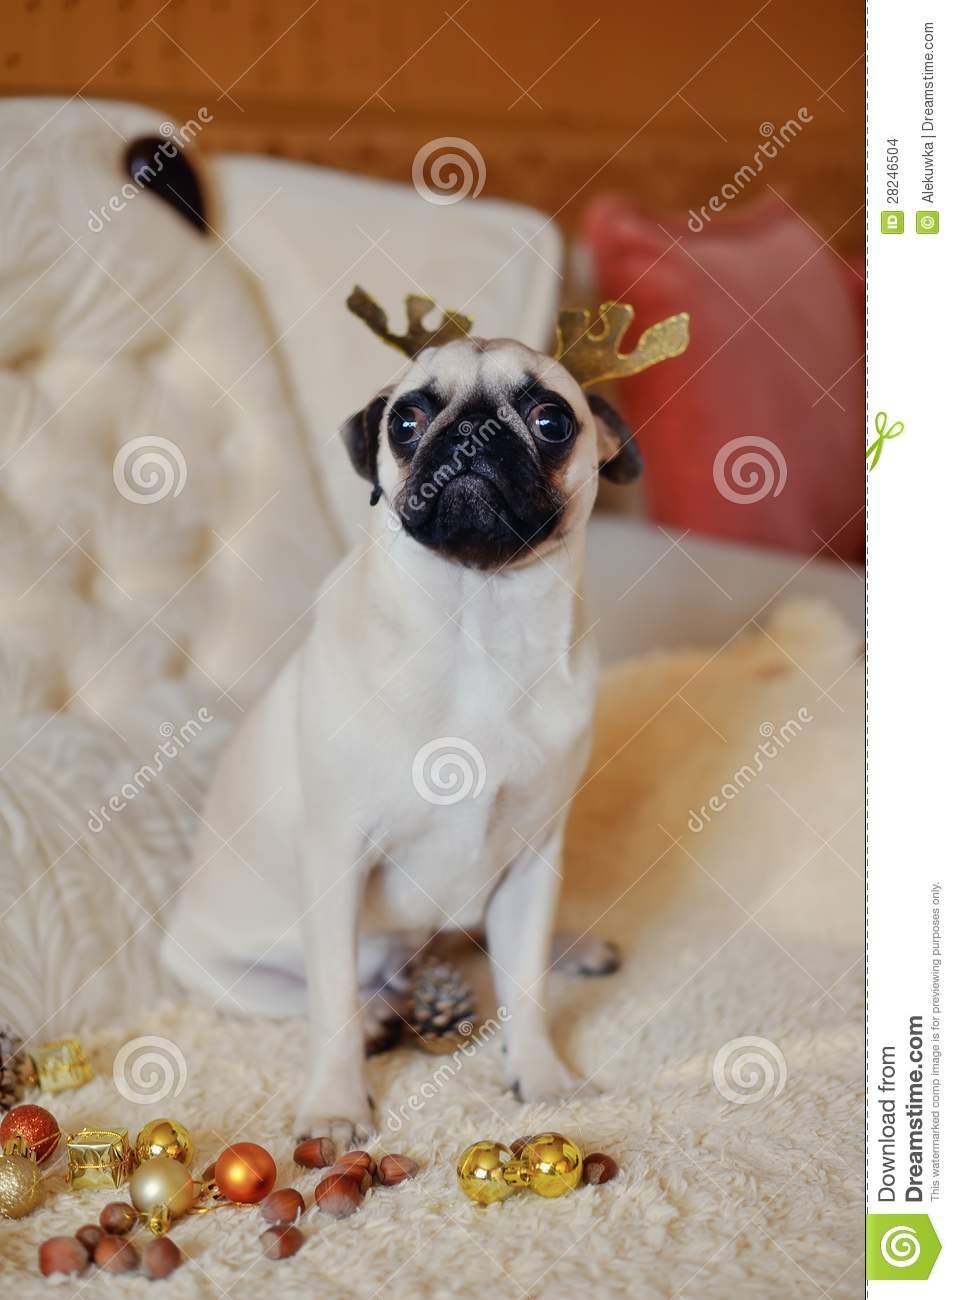 Christmas Party   Pug With Deer Antlers On A Background Of Christmas